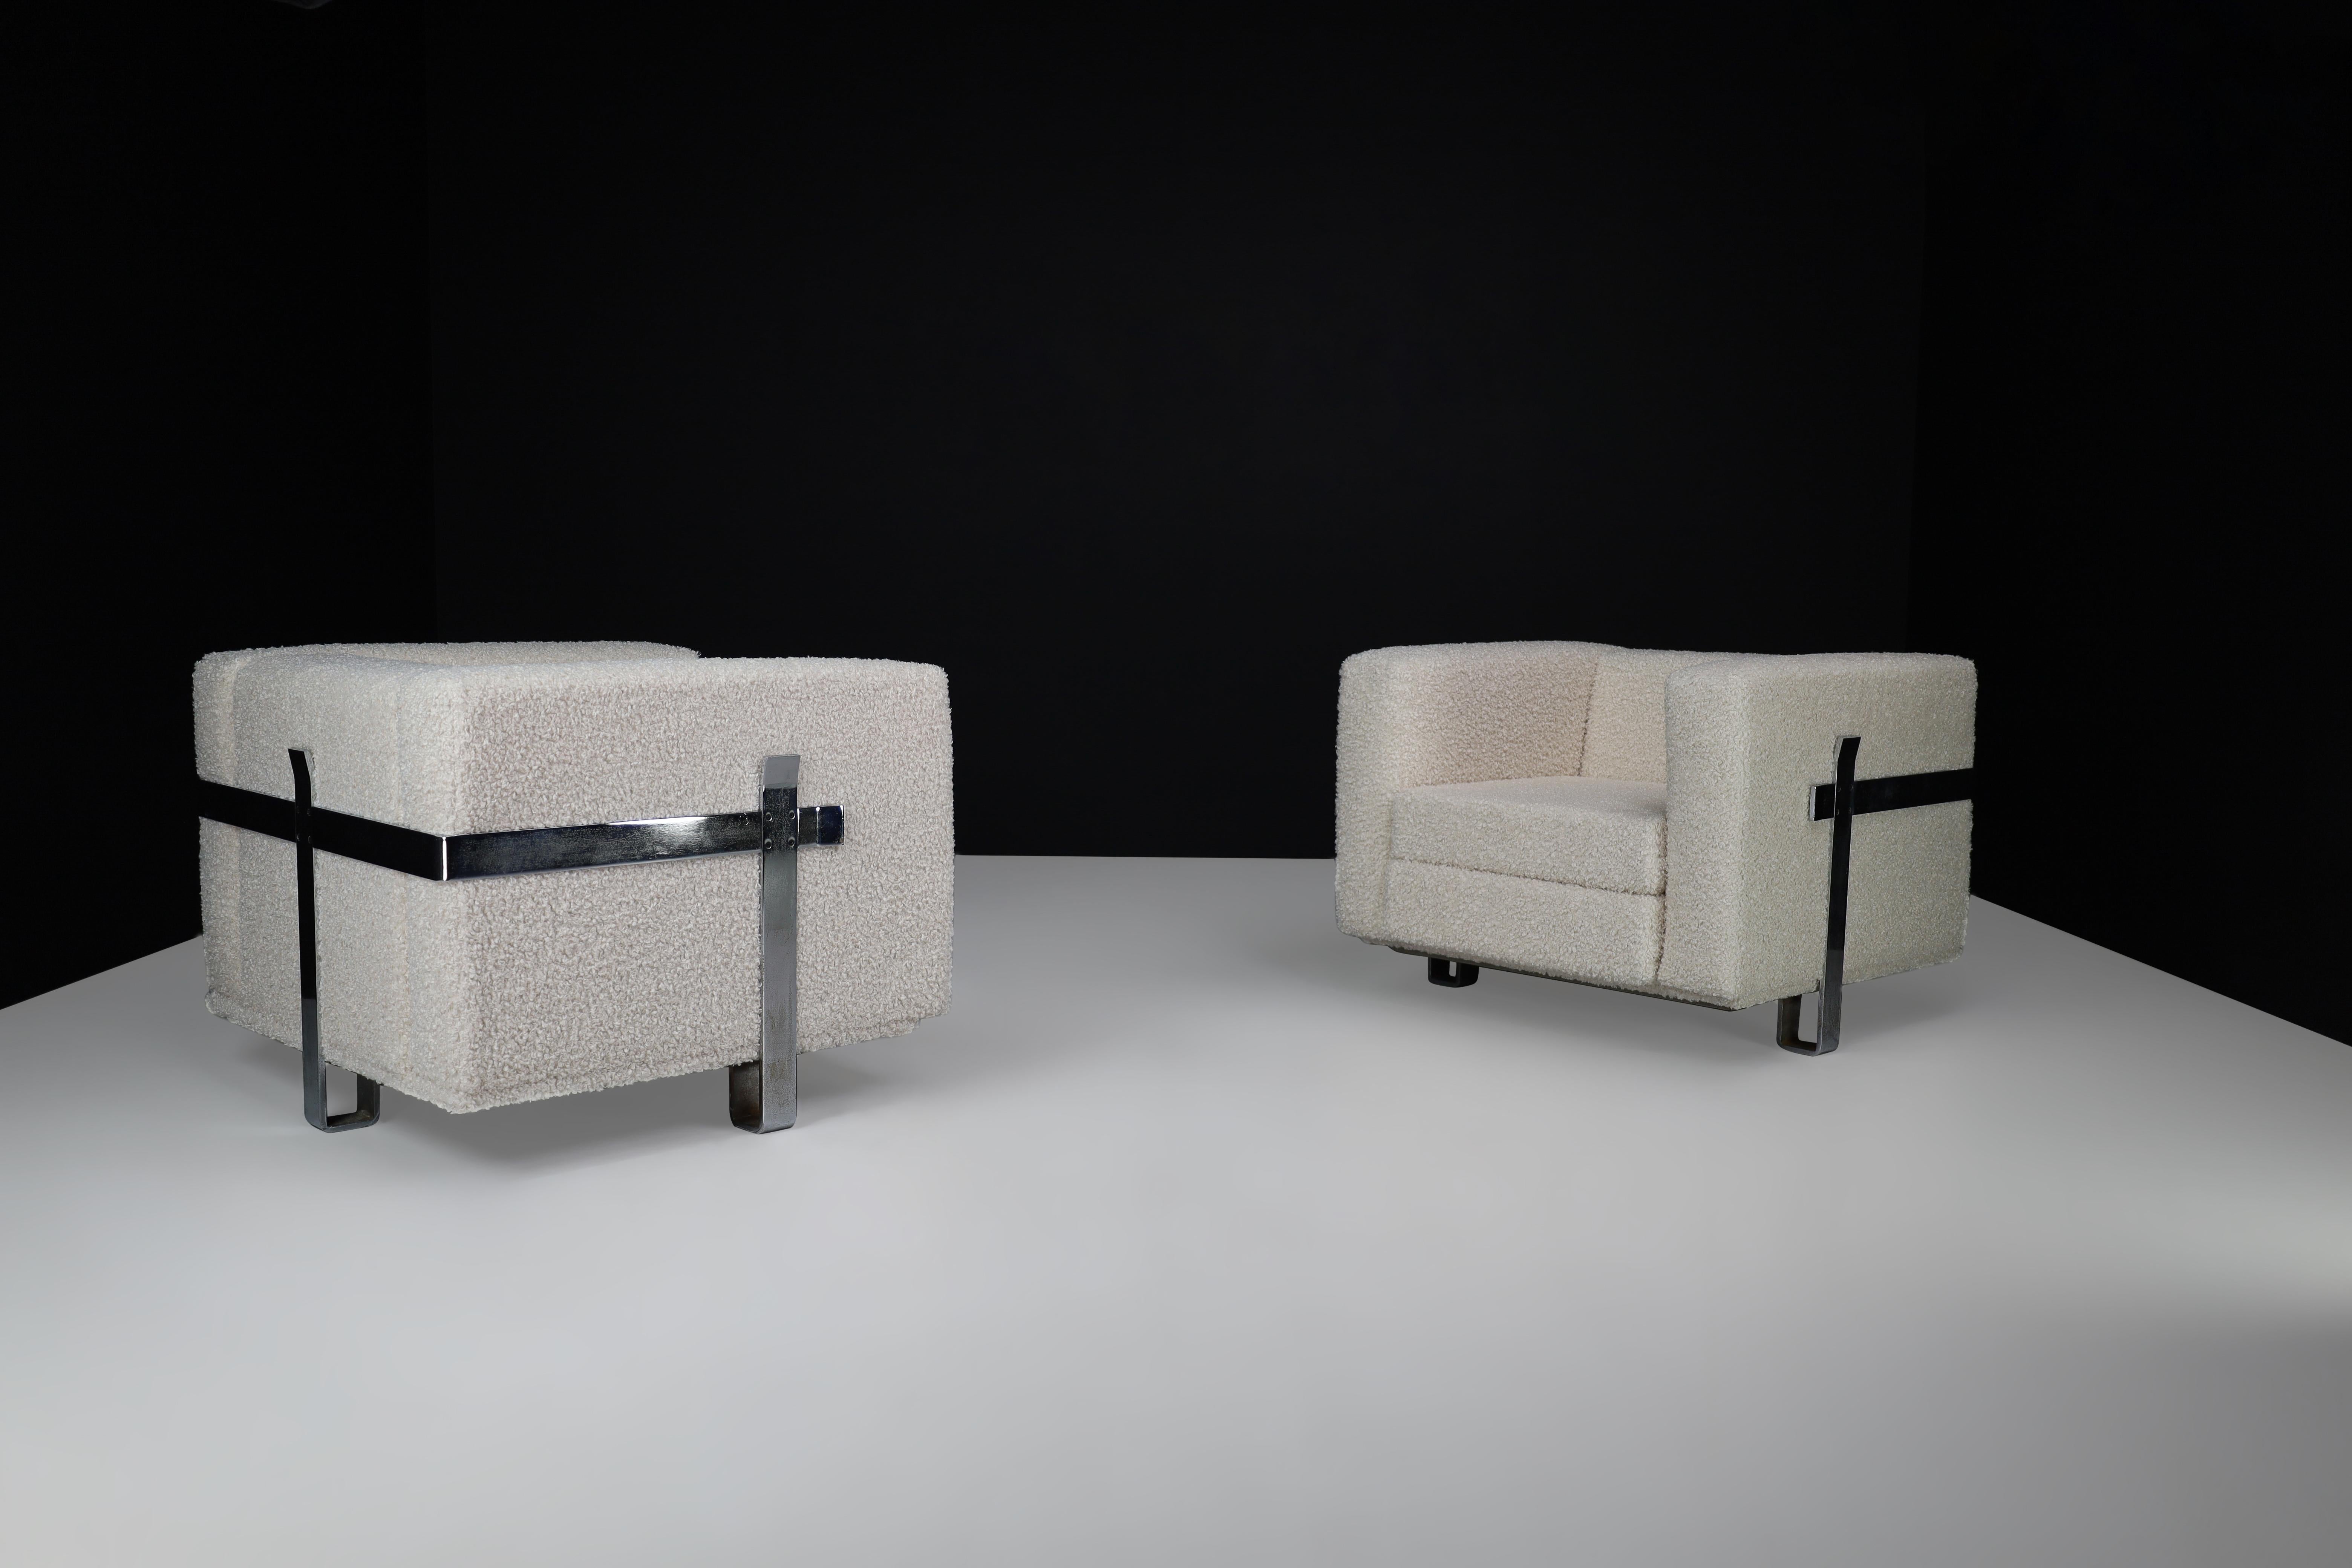 Stainless Steel Midcentury Bouclé Lounge Chairs Designed by Luigi Caccia Dominioni for Azucena